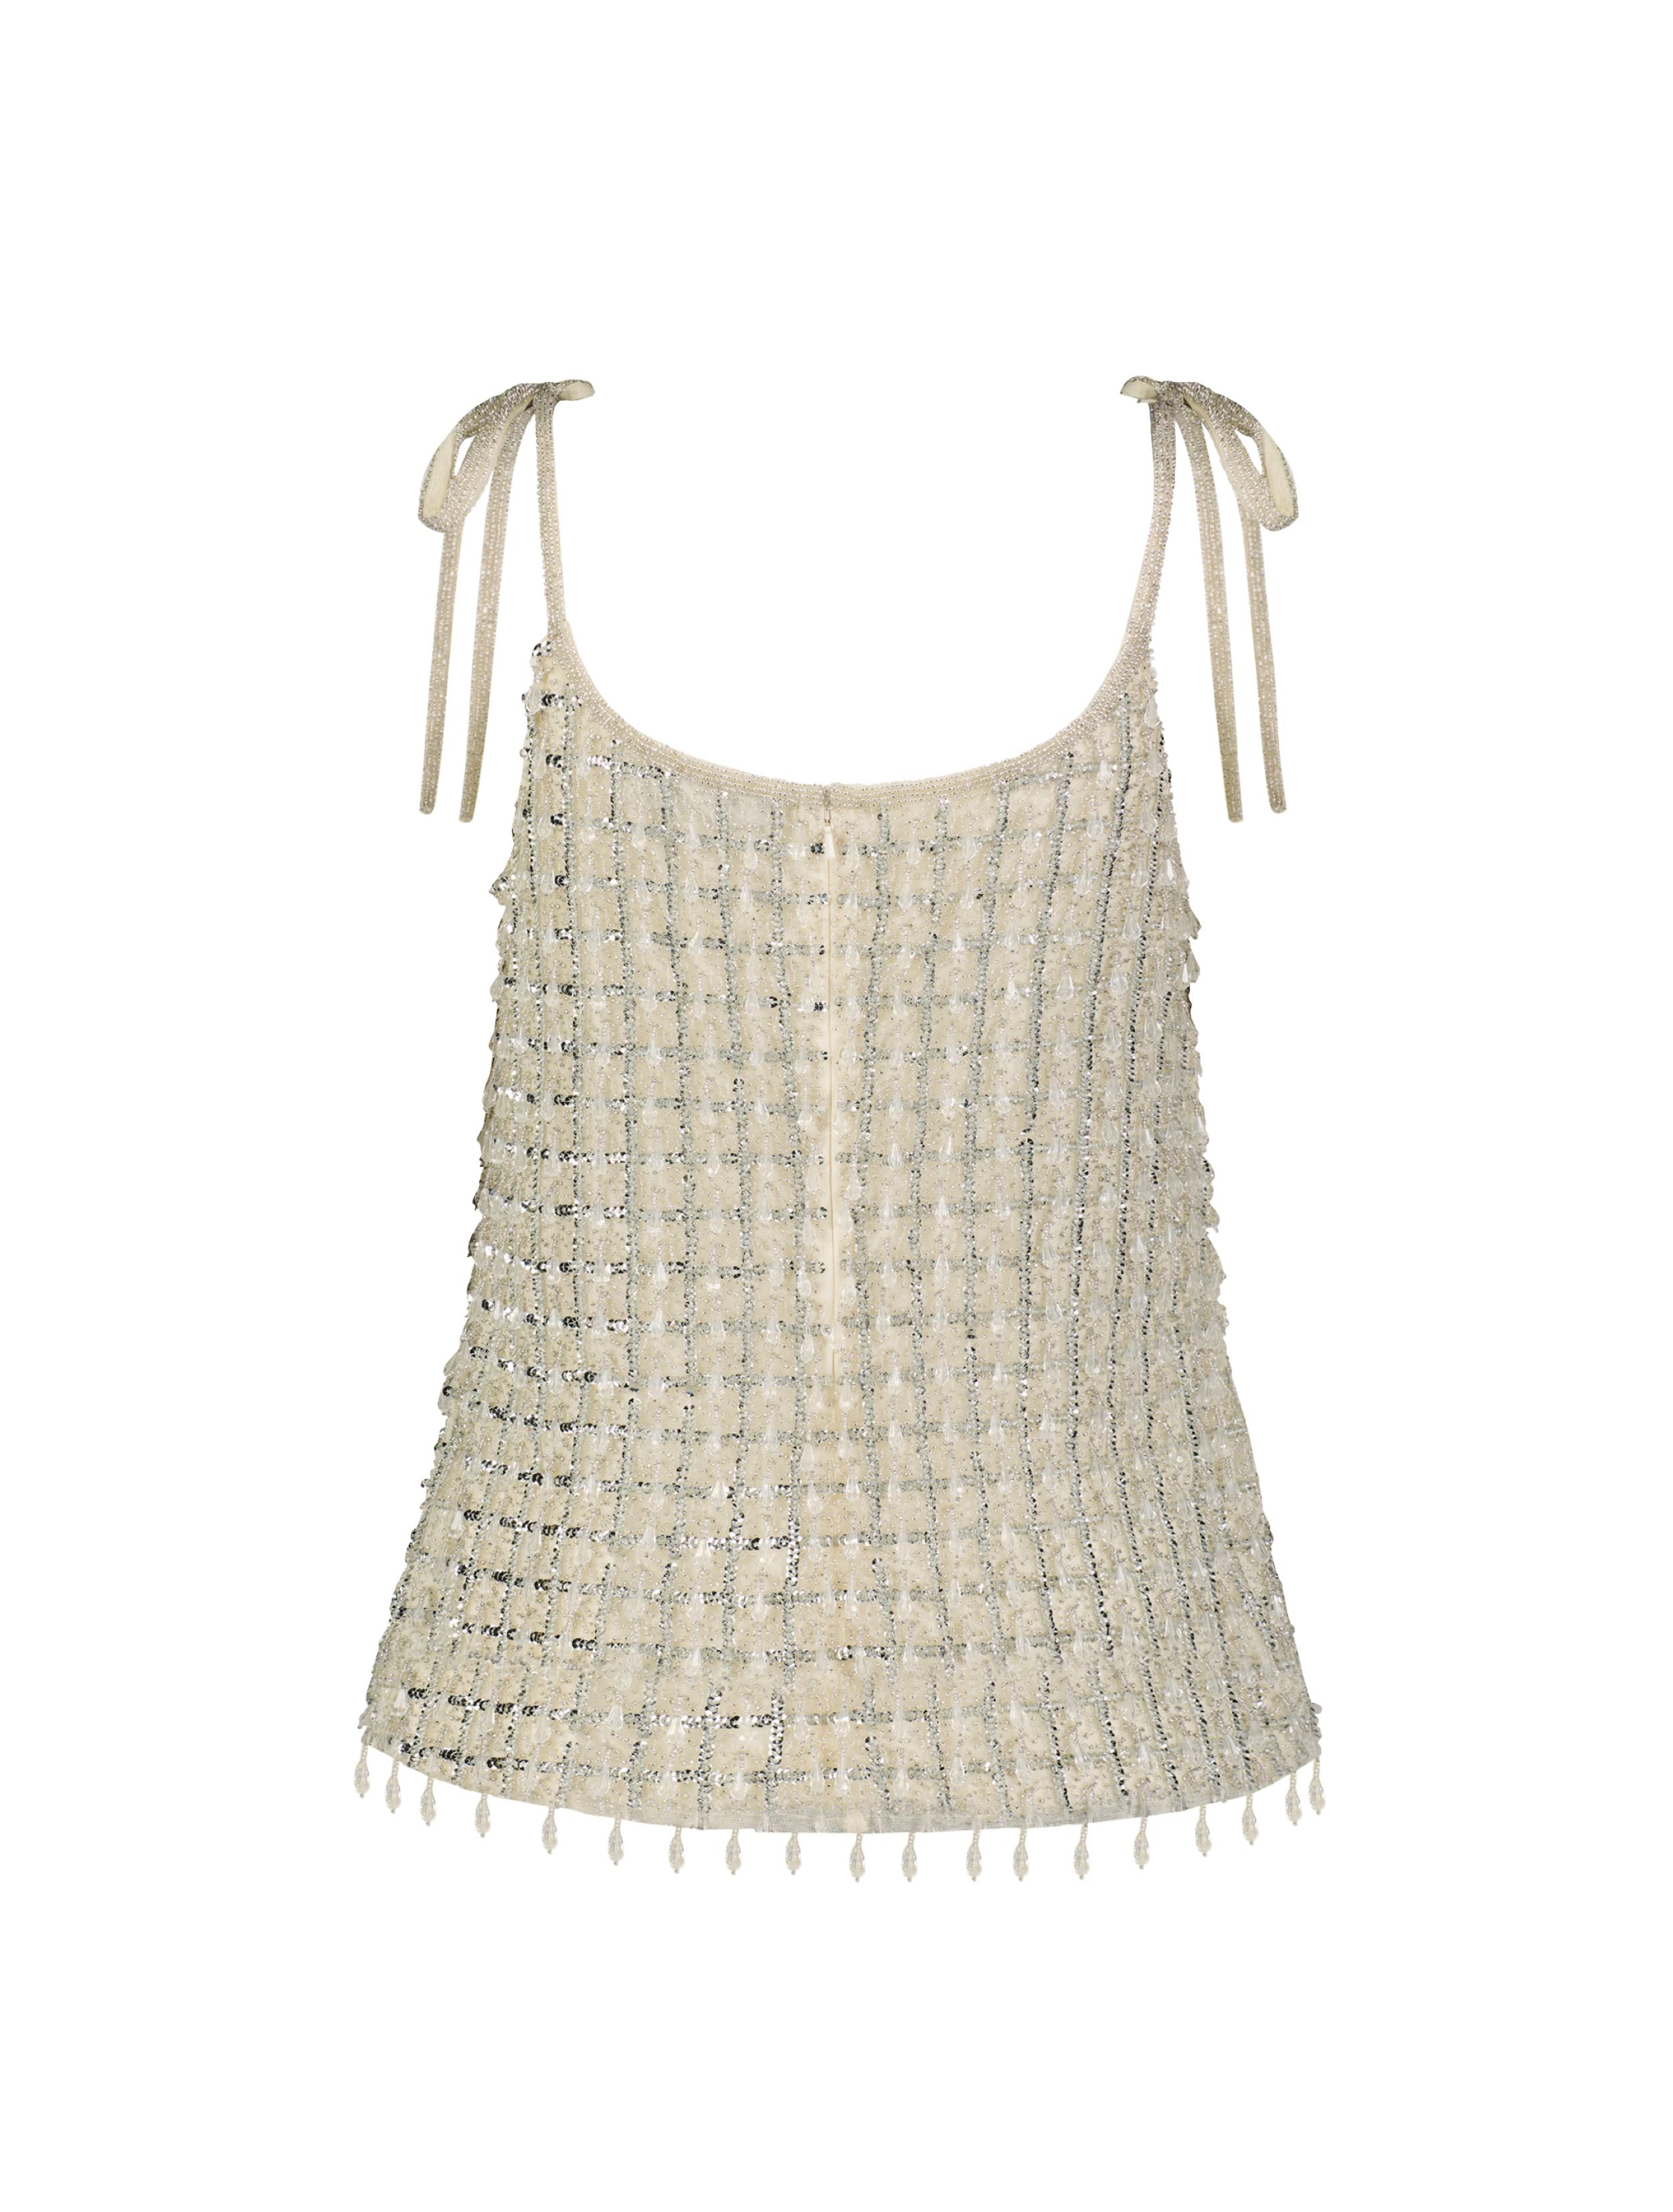 Layered Disc Chainmail Cami Top  Sequin bra top, Cami tops, Bra tops